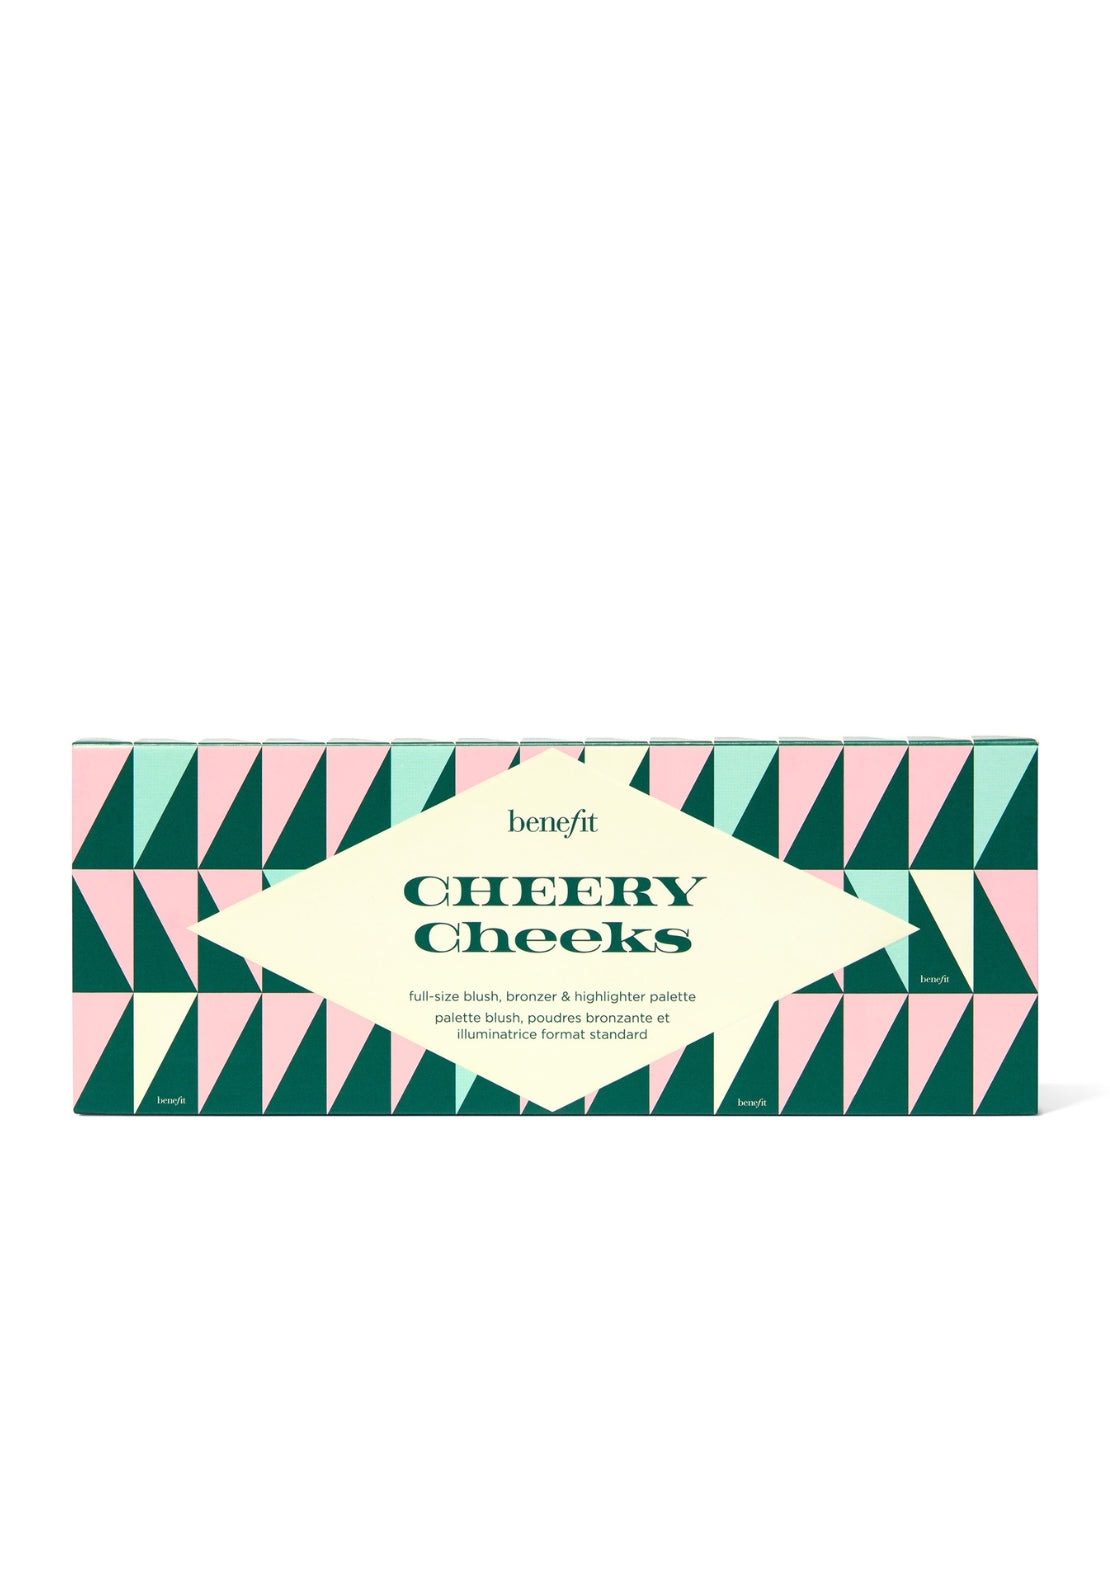 Cheery Cheeks limited edition face palette